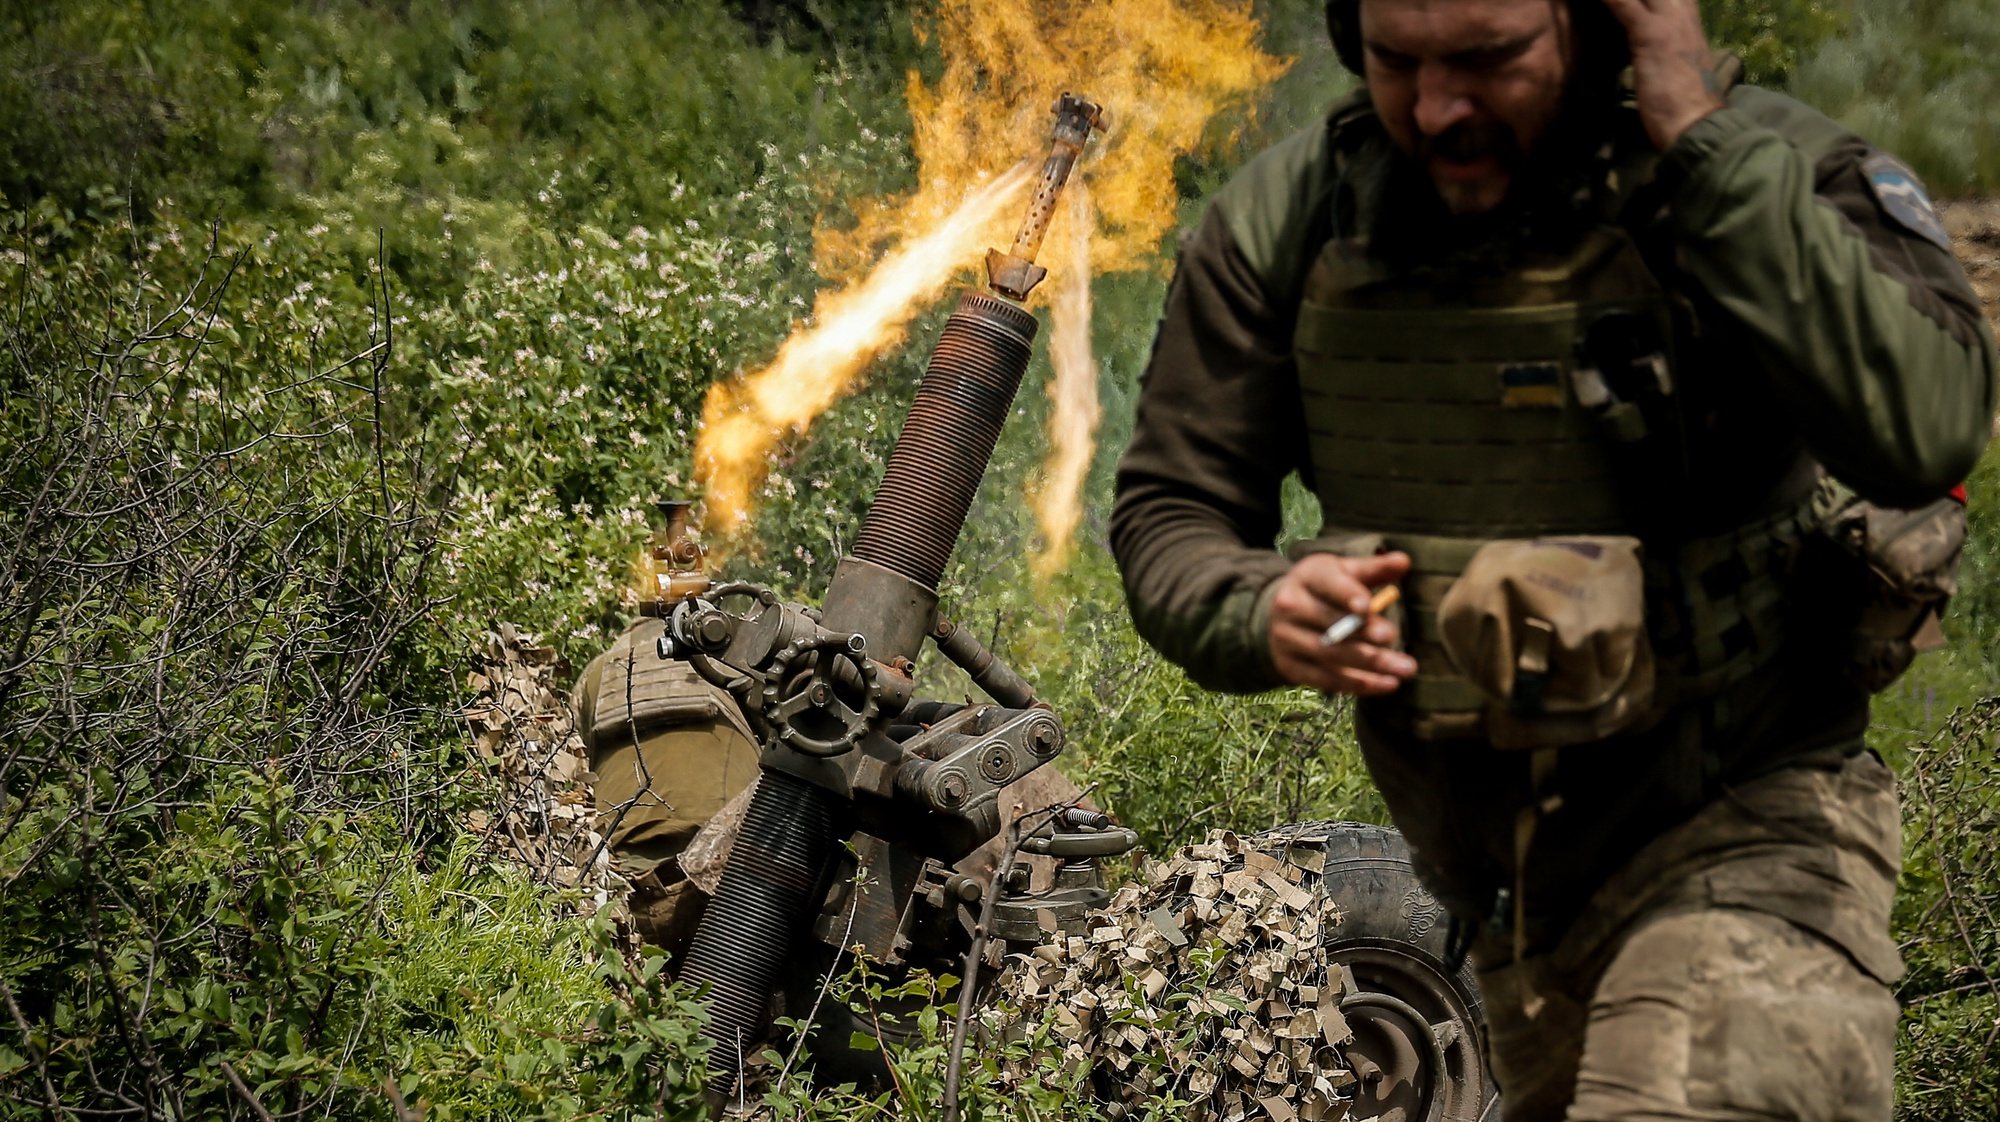 epa10648098 Members of the 10th Separate Mountain Assault Brigade &#039;Edelweiss&#039;, a unit of the Ukrainian Ground Forces, fire a mortar at an undisclosed location in the Bakhmut direction, Donetsk region, eastern Ukraine, 23 May 2023, amid the Russian invasion. The frontline city of Bakhmut, a key target for Russian forces, has seen heavy fighting for months. Russian troops on 24 February 2022, entered Ukrainian territory, starting a conflict that has provoked destruction and a humanitarian crisis.  EPA/OLEG PETRASYUK